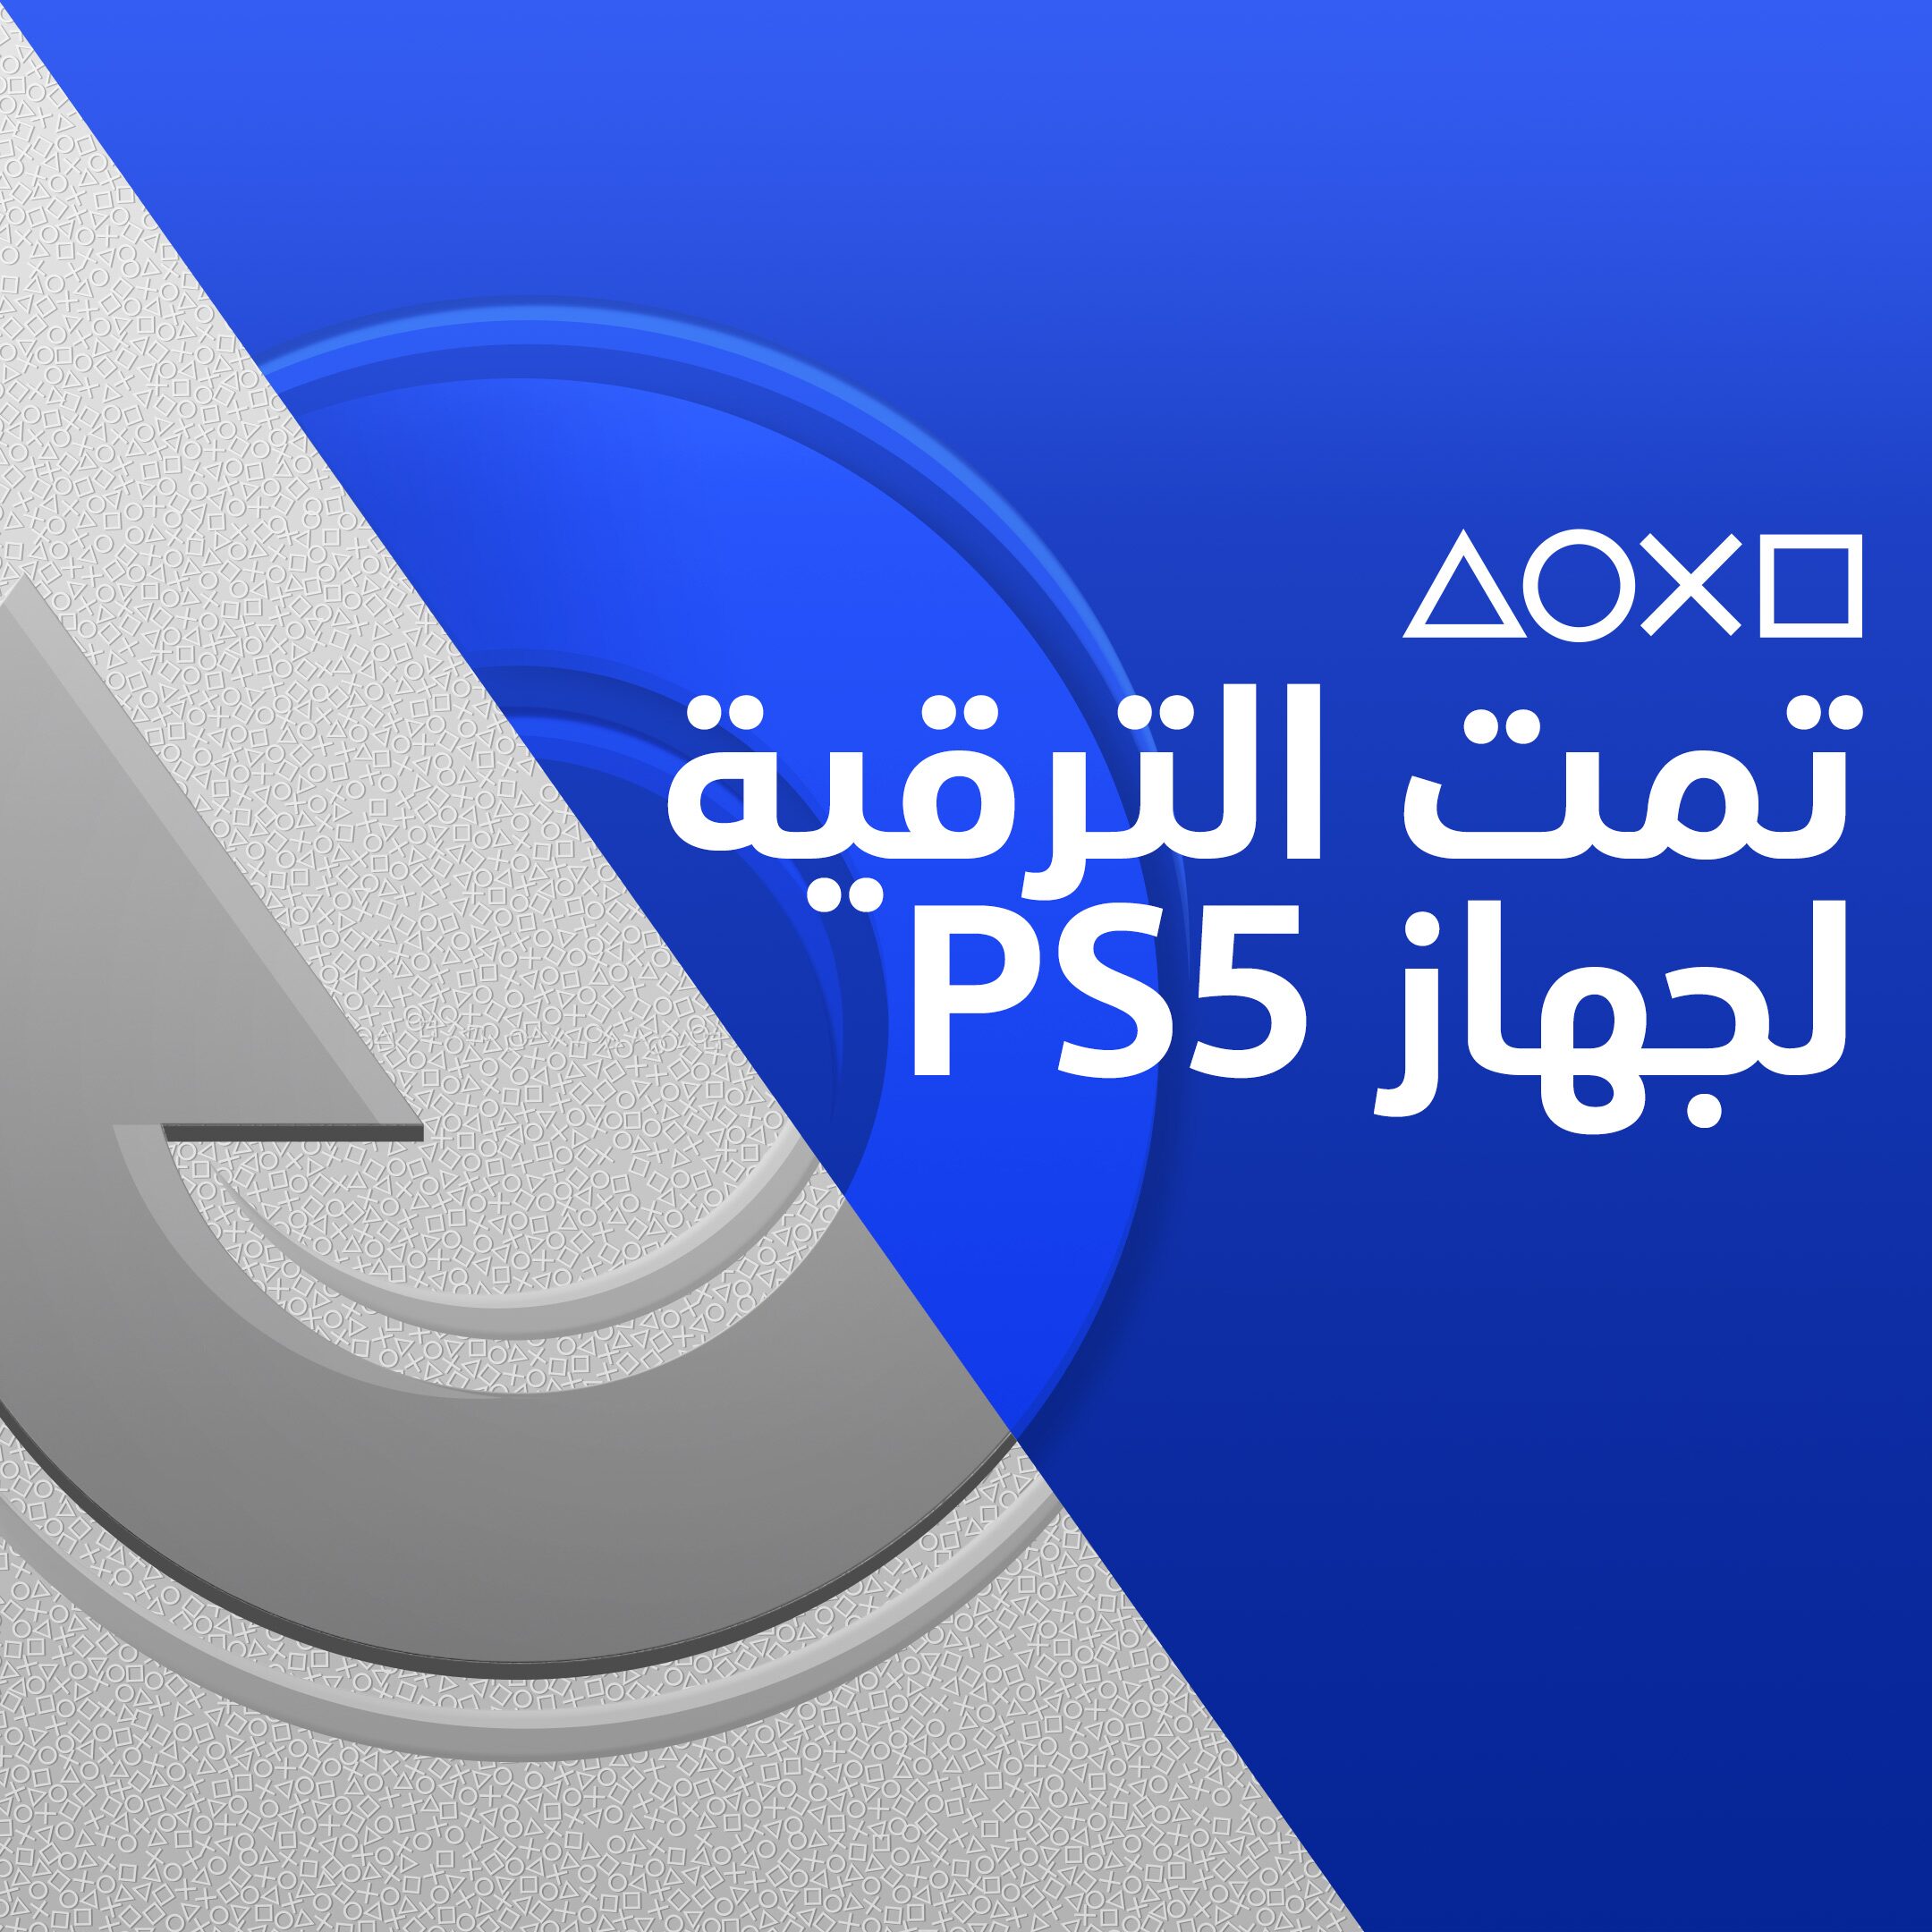 [EDITORIAL] Upgraded For PS5 S26 MS